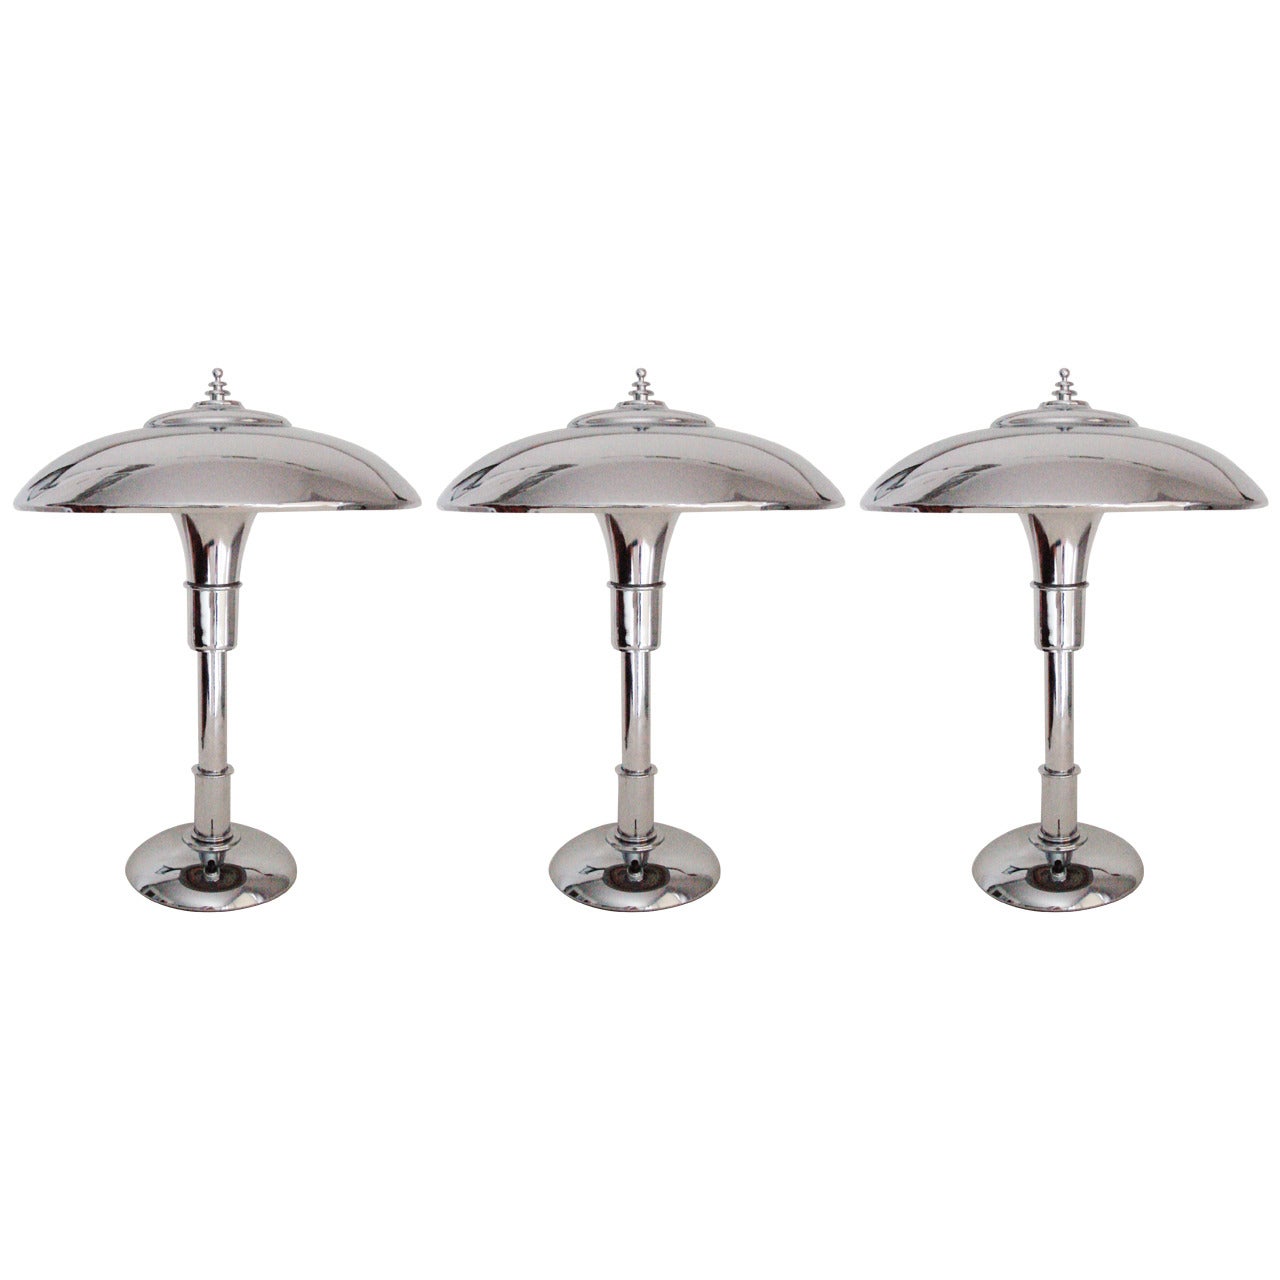 Three Iconic American Art Deco Chrome Plated Guardsman Junior Lamps by Faries